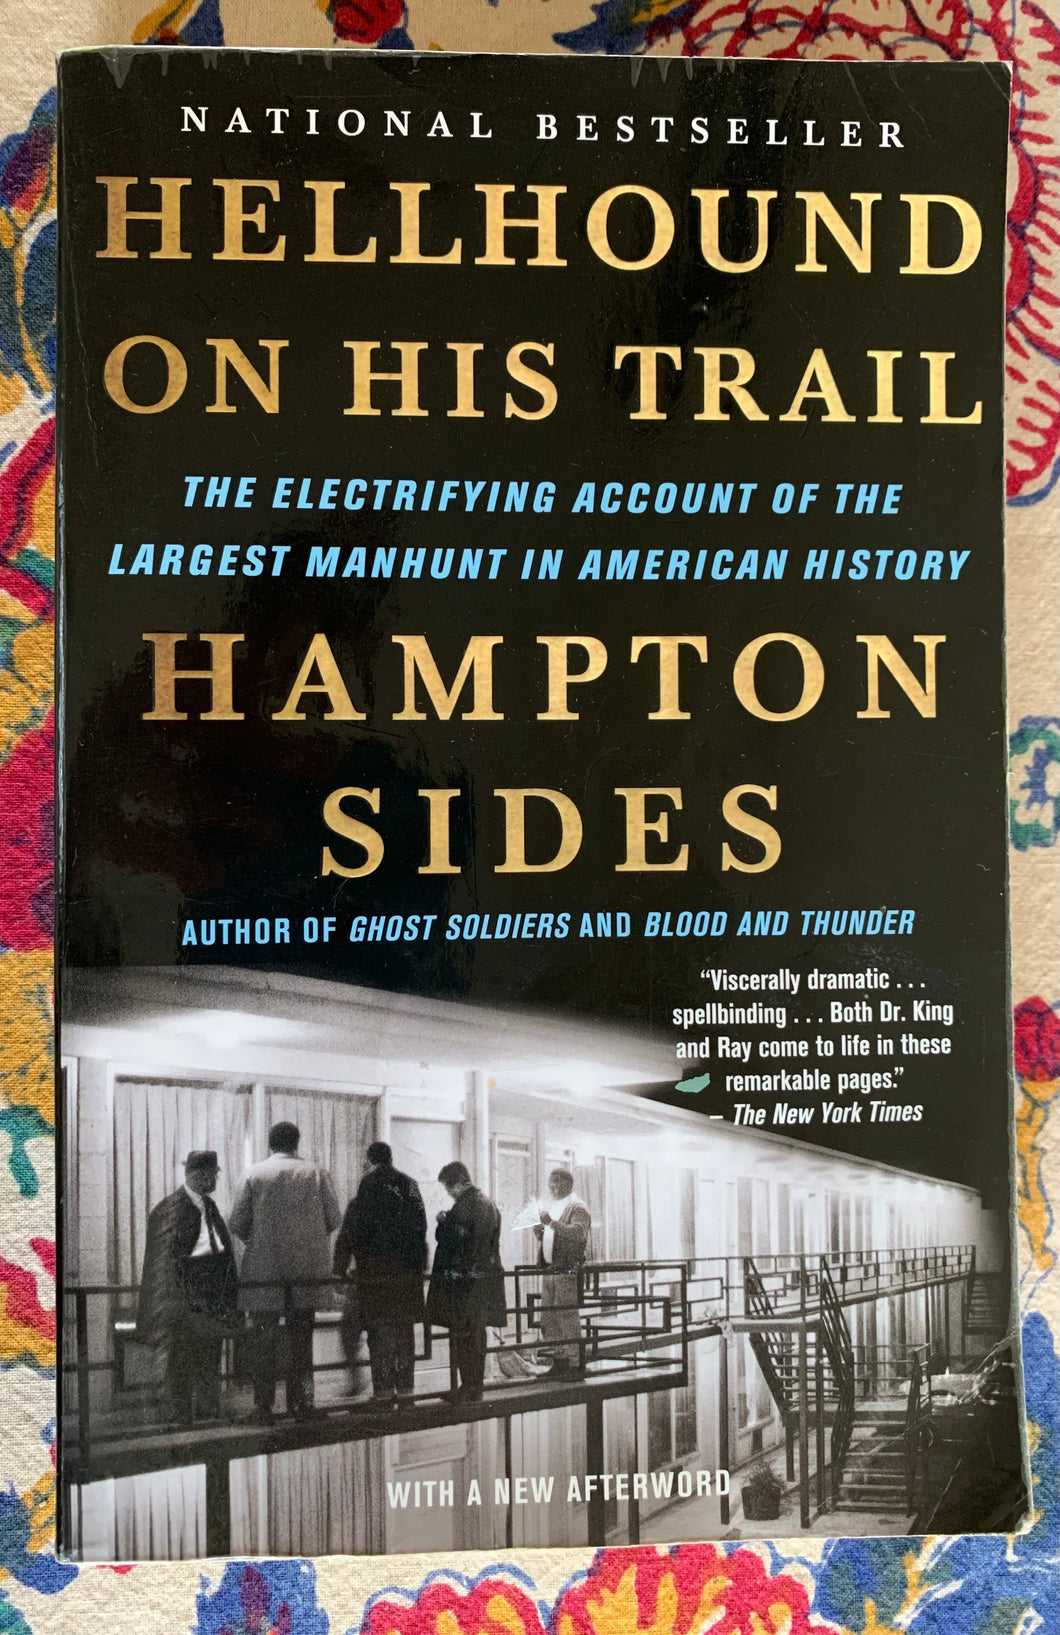 Hellhound On His Trail: The Electrifying Account of the Largest Manhunt in American History